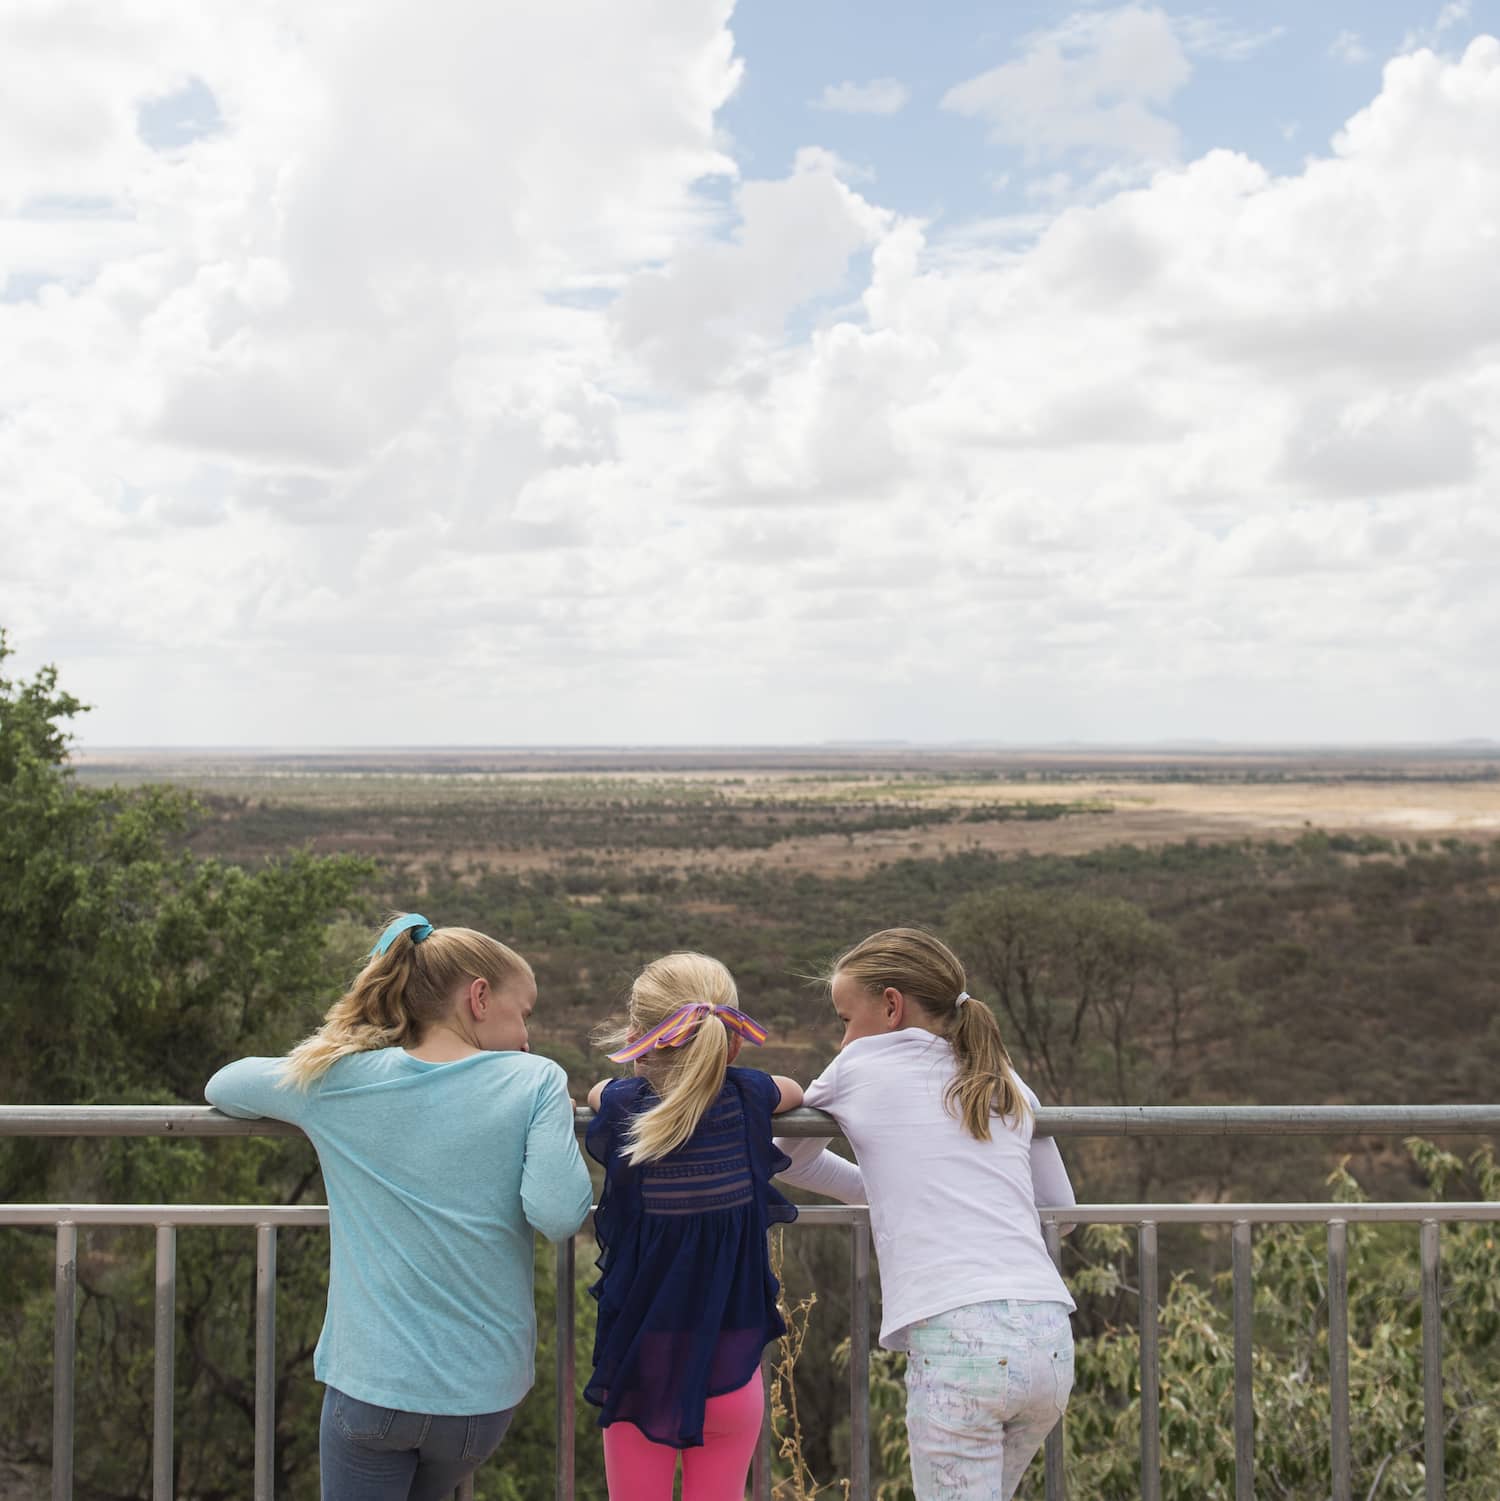 Three young girls at Australian Age of Dinosaurs museum, Winton, leaning on the railing overlooking the outback landscape